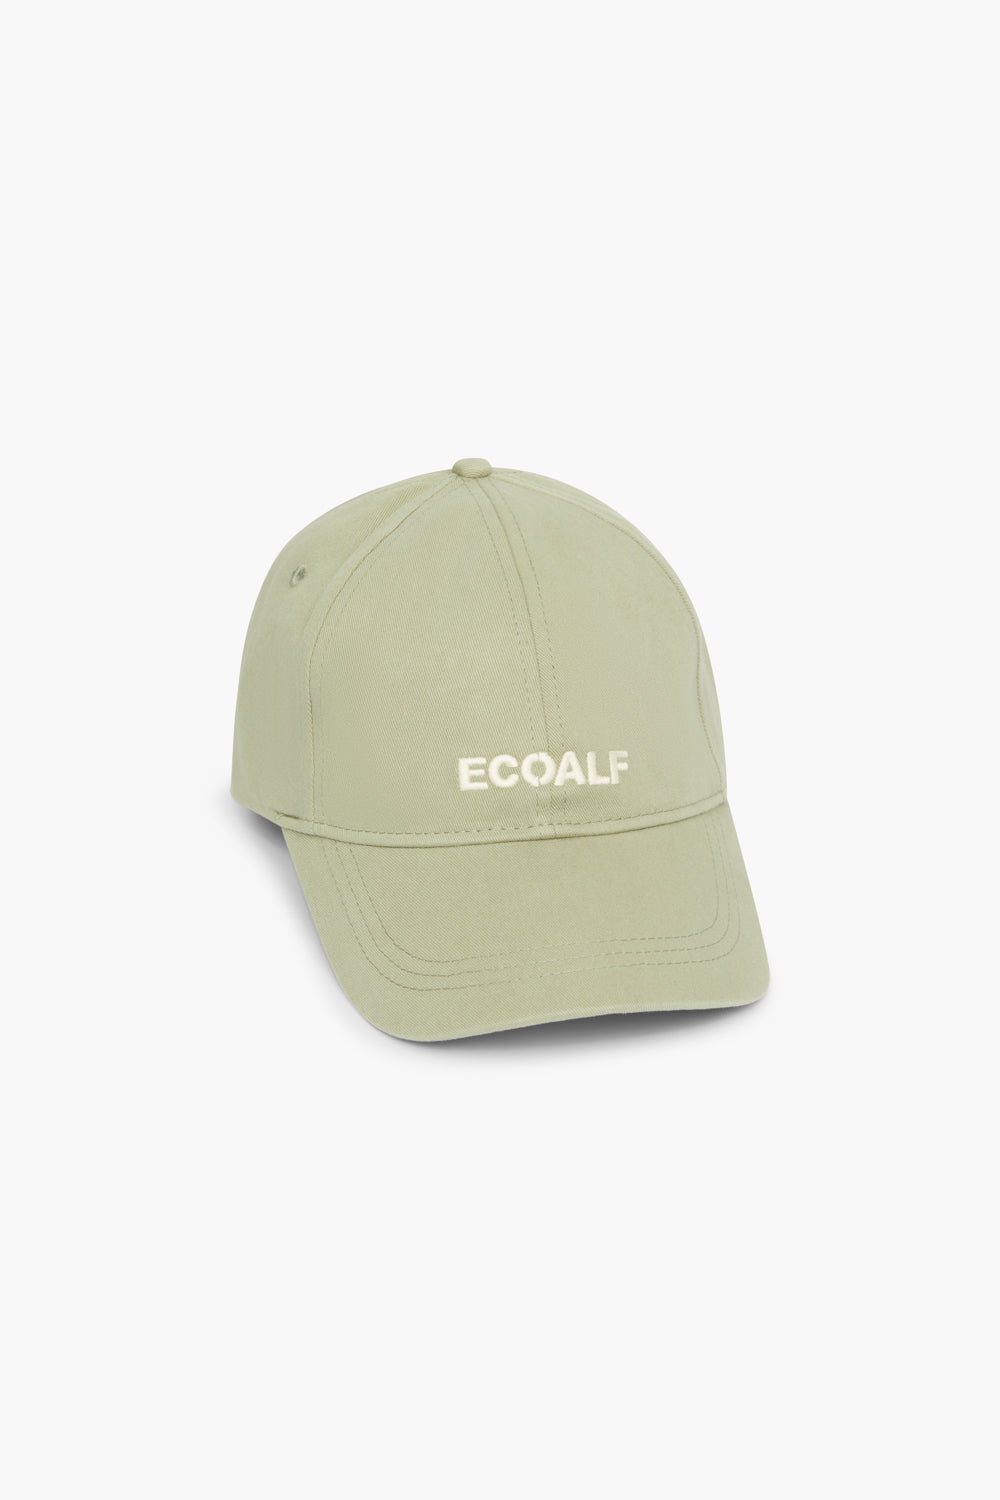 CASQUETTE EMBROIDERED MINT